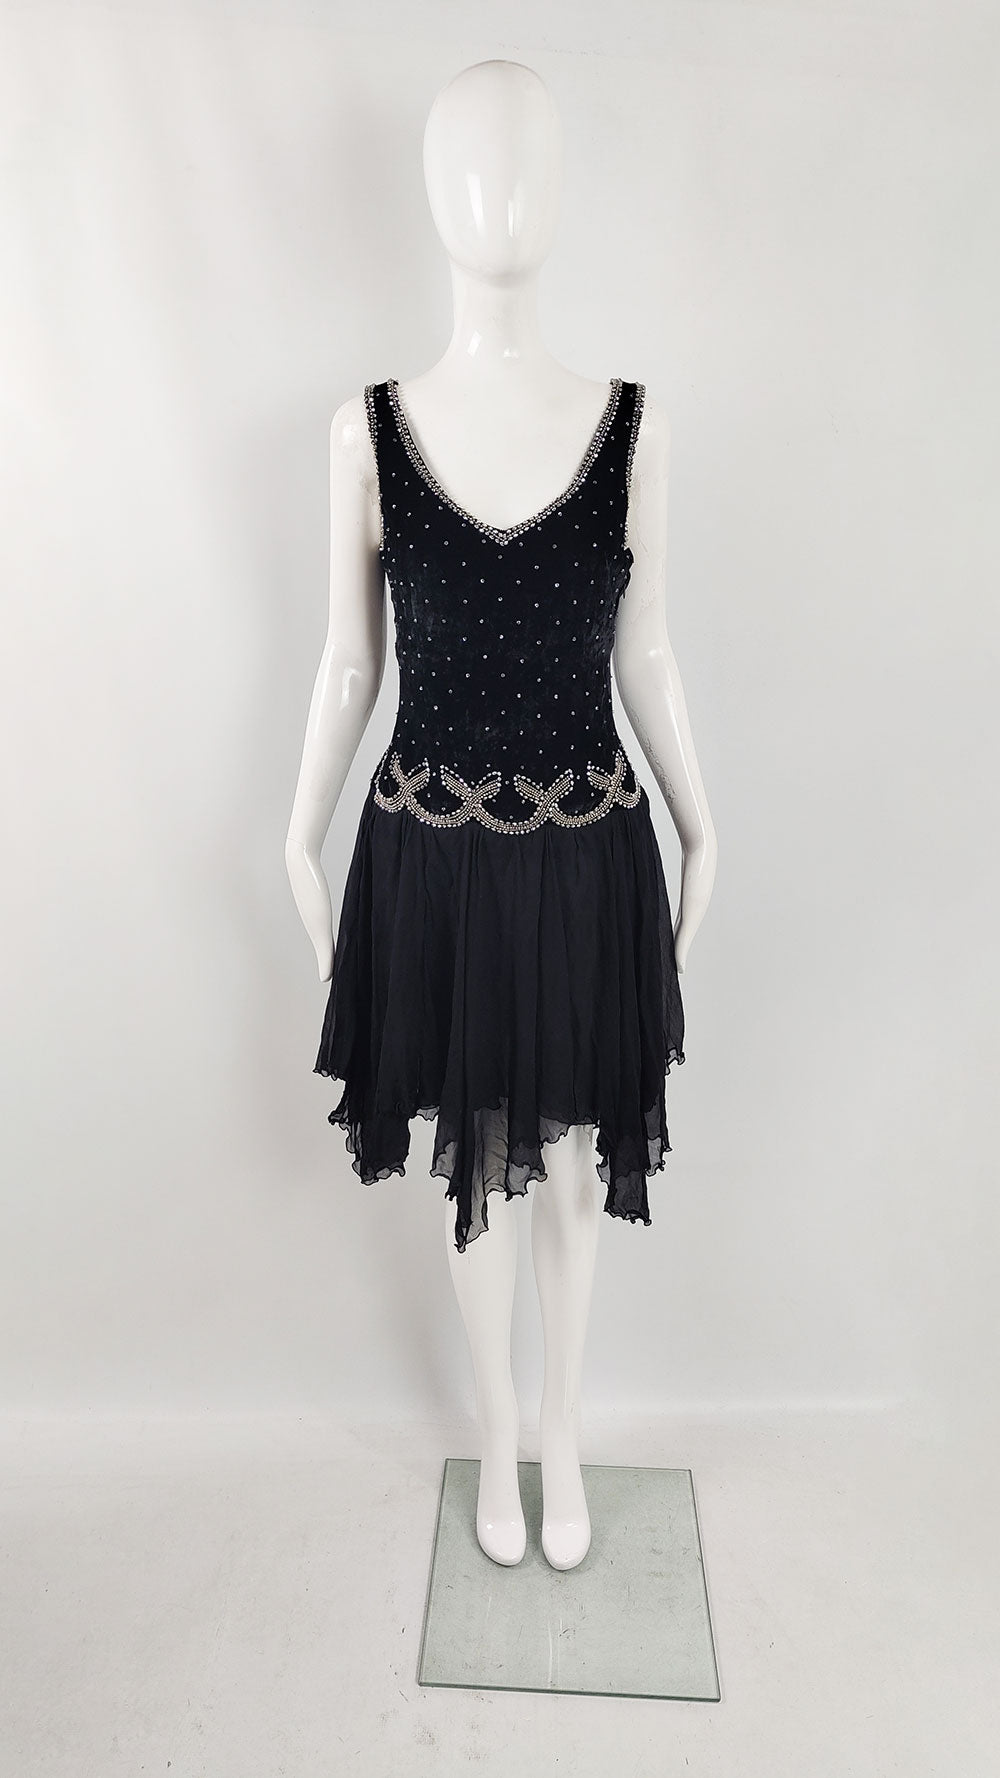 An image of a vintage Blumarine dress in a 1920s style with a beaded bodice and handkerchief hem.